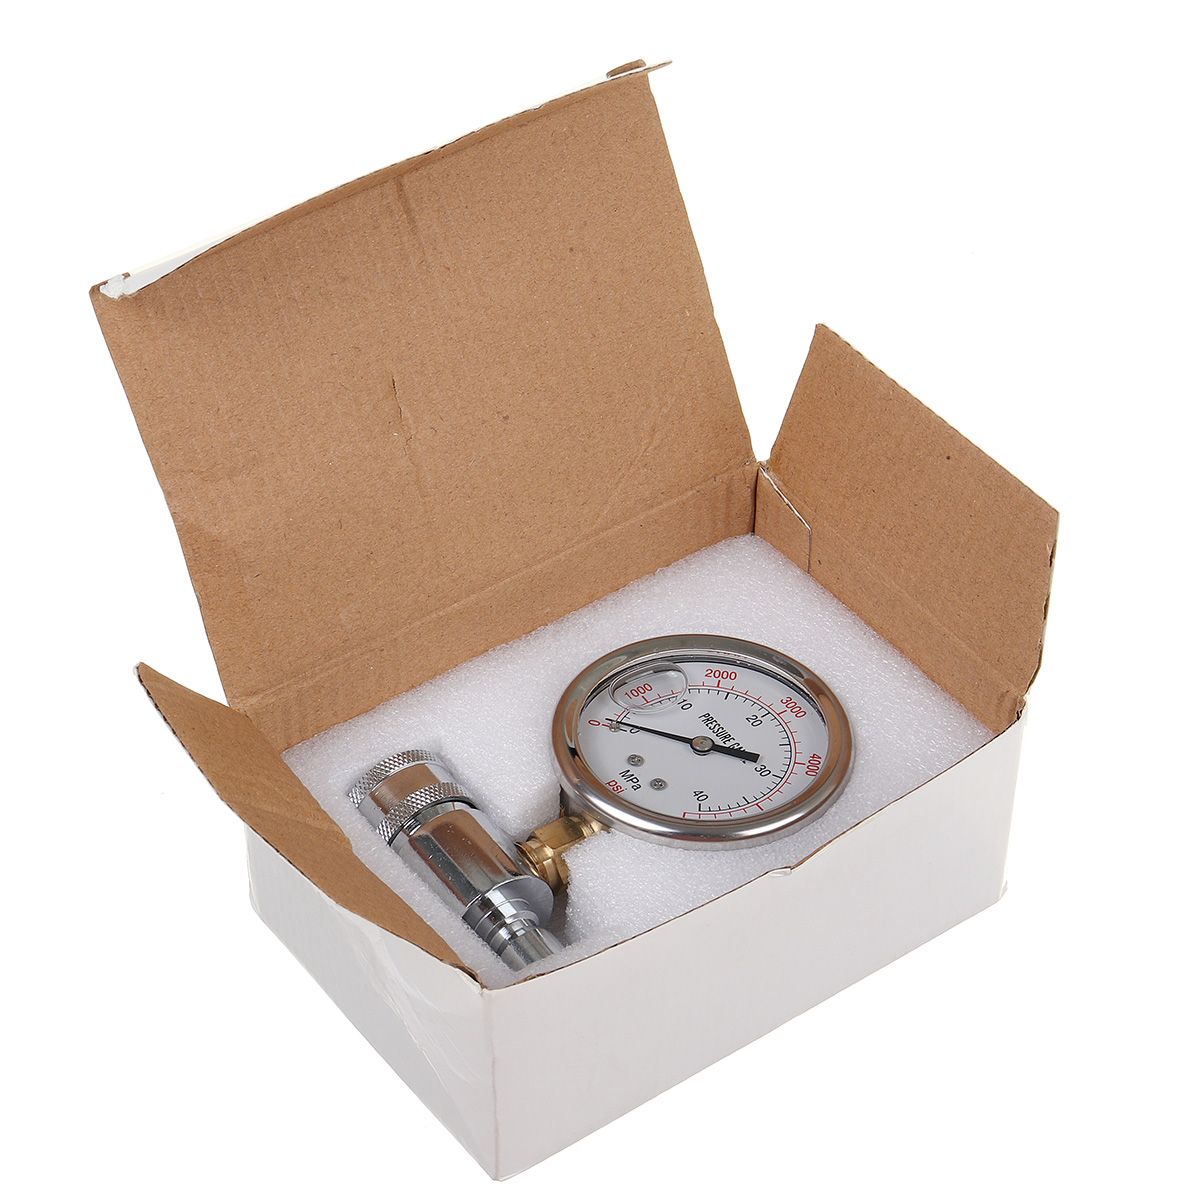 Axial-Hydraulic-Pressure-Gauge-Test-40MPa-6000PSI-Stainless-Steel-Indicator-1649889